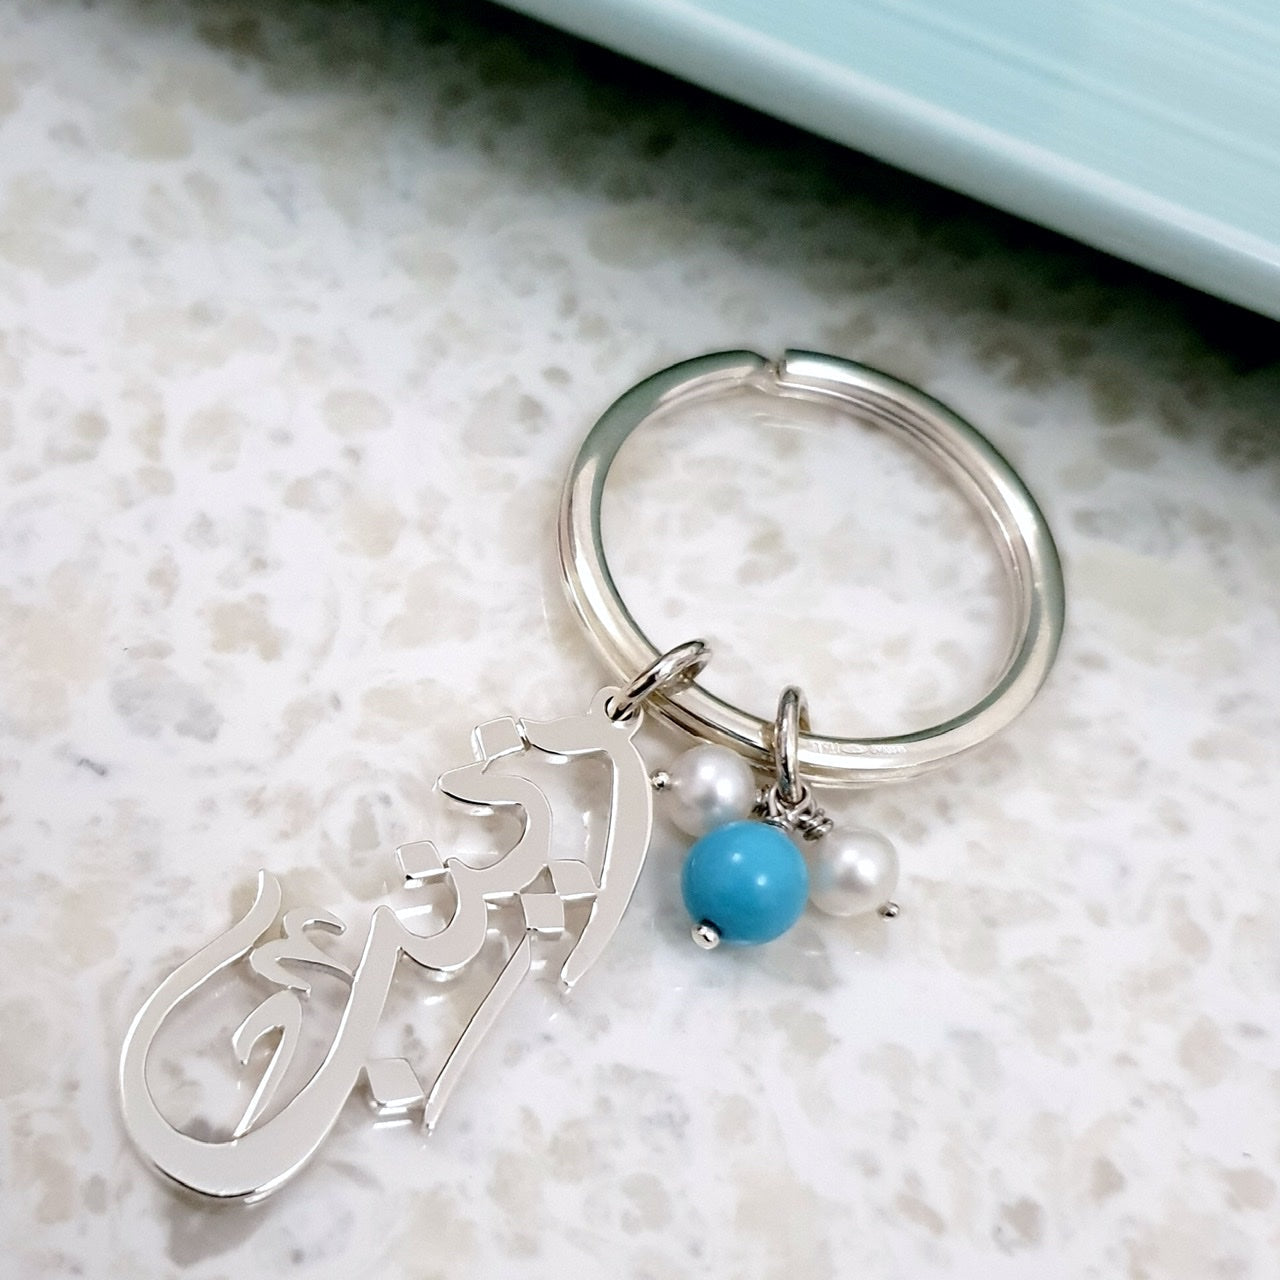 Key Ring with Arabic Name & Pearl Beads